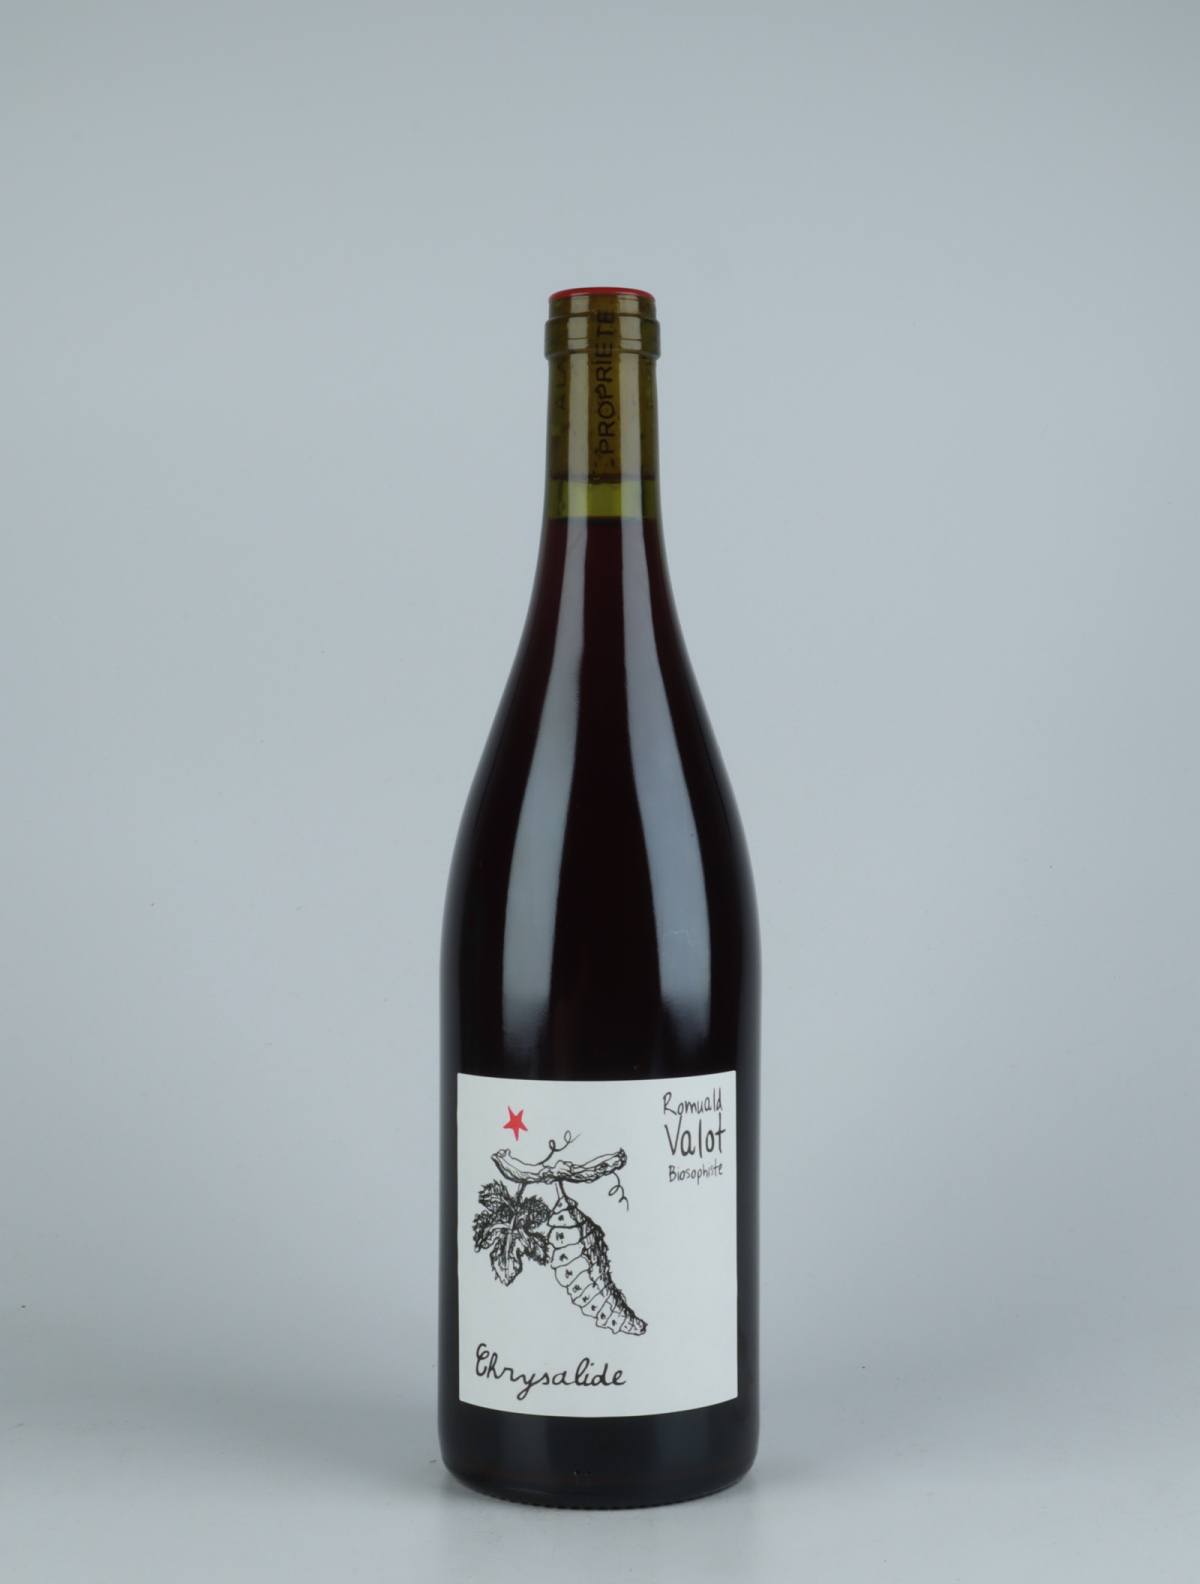 A bottle 2021 Chrysalide Red wine from Romuald Valot, Beaujolais in France